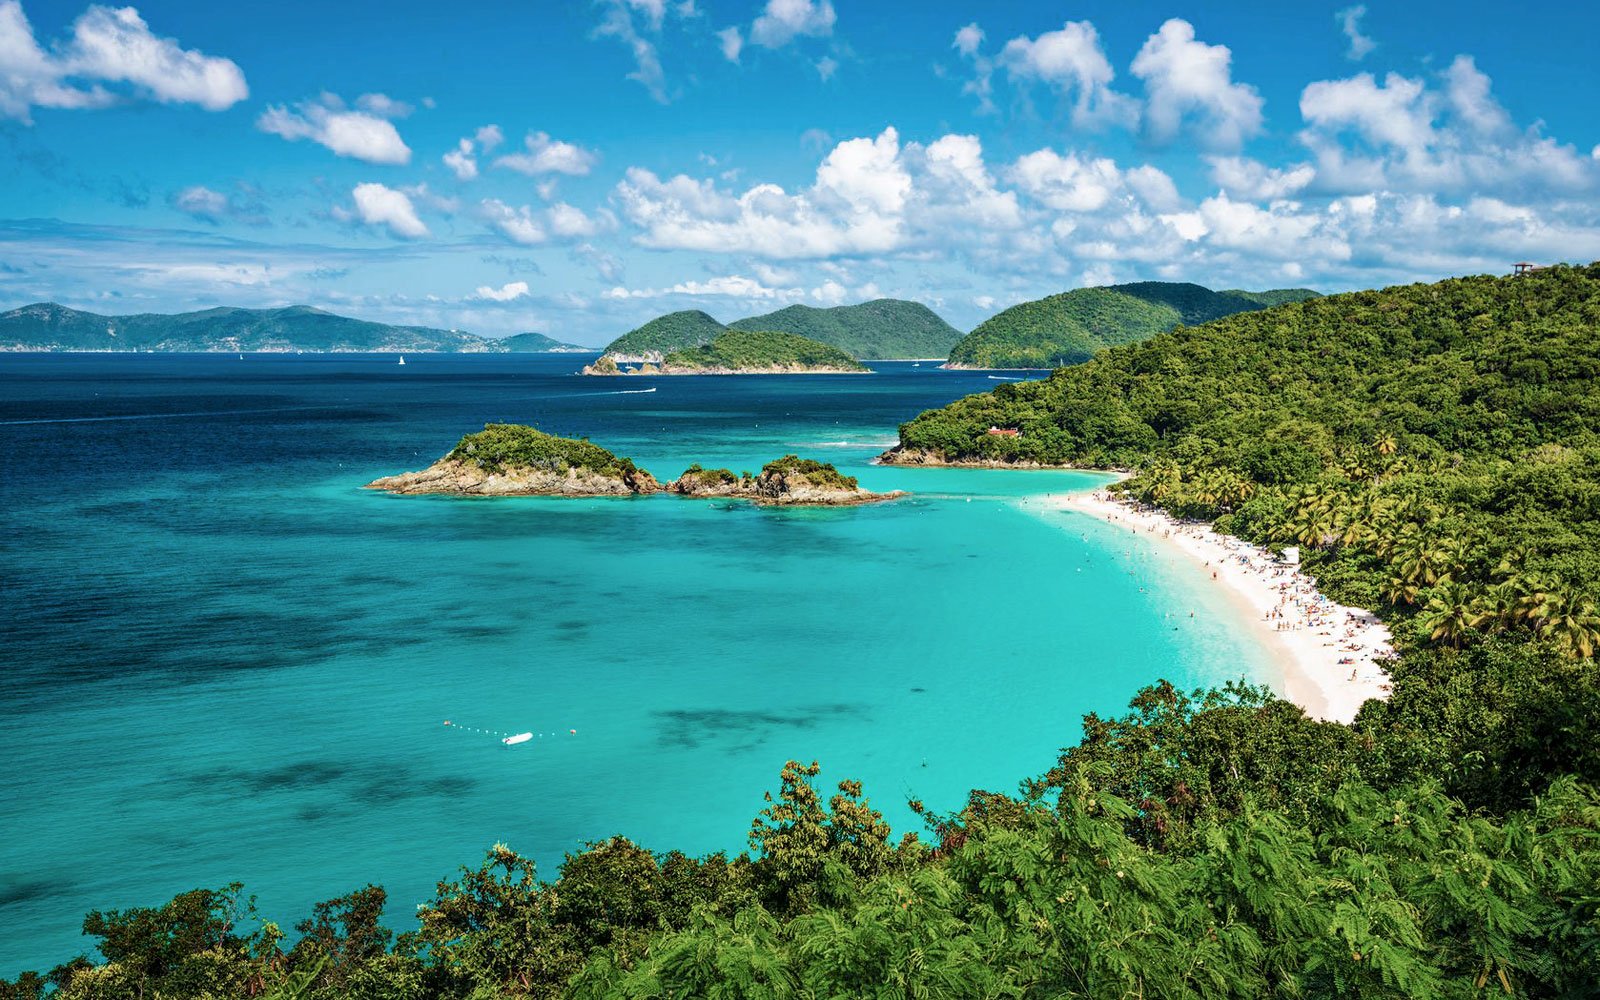 Trunk Bay, U.S. Virgin Islands: A Serene Retreat on St. John. Escape to the peaceful shores of Trunk Bay on St. John in the U.S. Virgin Islands. This palm-fringed beach offers a pristine and idyllic setting for a tranquil escape. Dive into the vibrant coral reefs for an unforgettable snorkeling experience or simply relax on the soft sand while gazing at the breathtaking views. Trunk Bay is a sanctuary of serenity away from the crowds, allowing you to reconnect with nature and find inner peace.